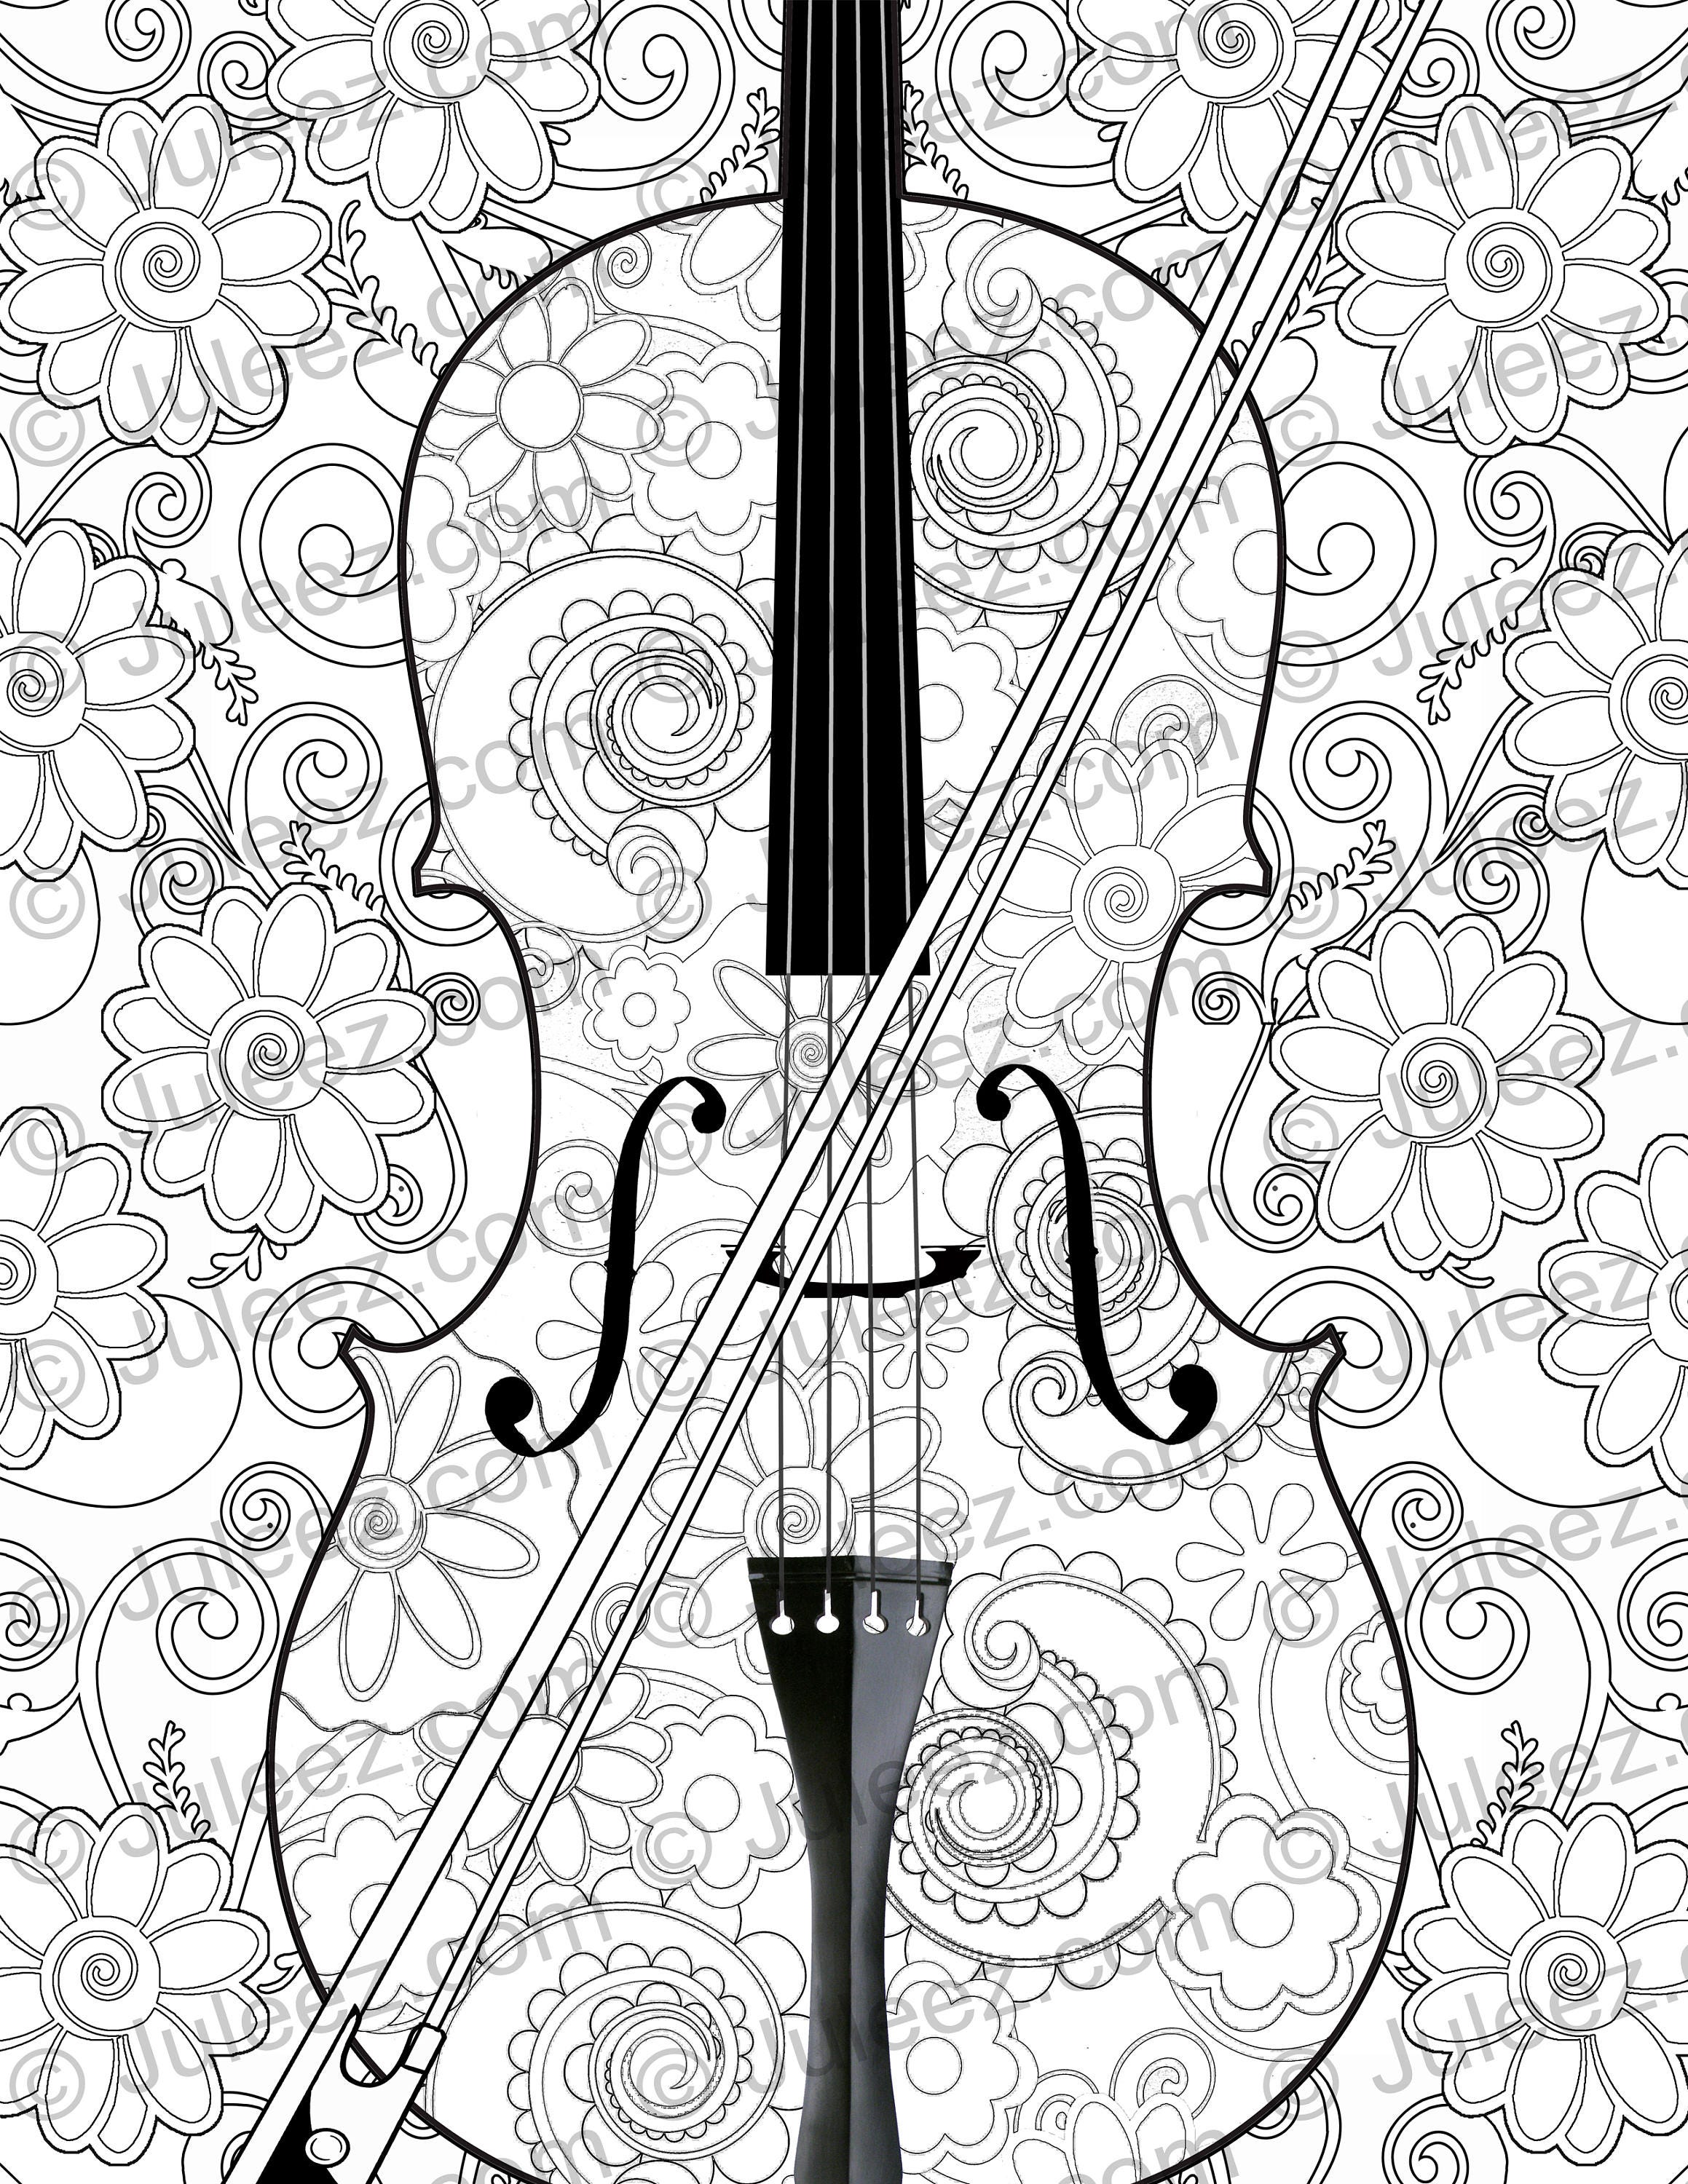 NEW Violin Flowers Printable Coloring Poster Adult Coloring Page Violin Coloring Poster Line